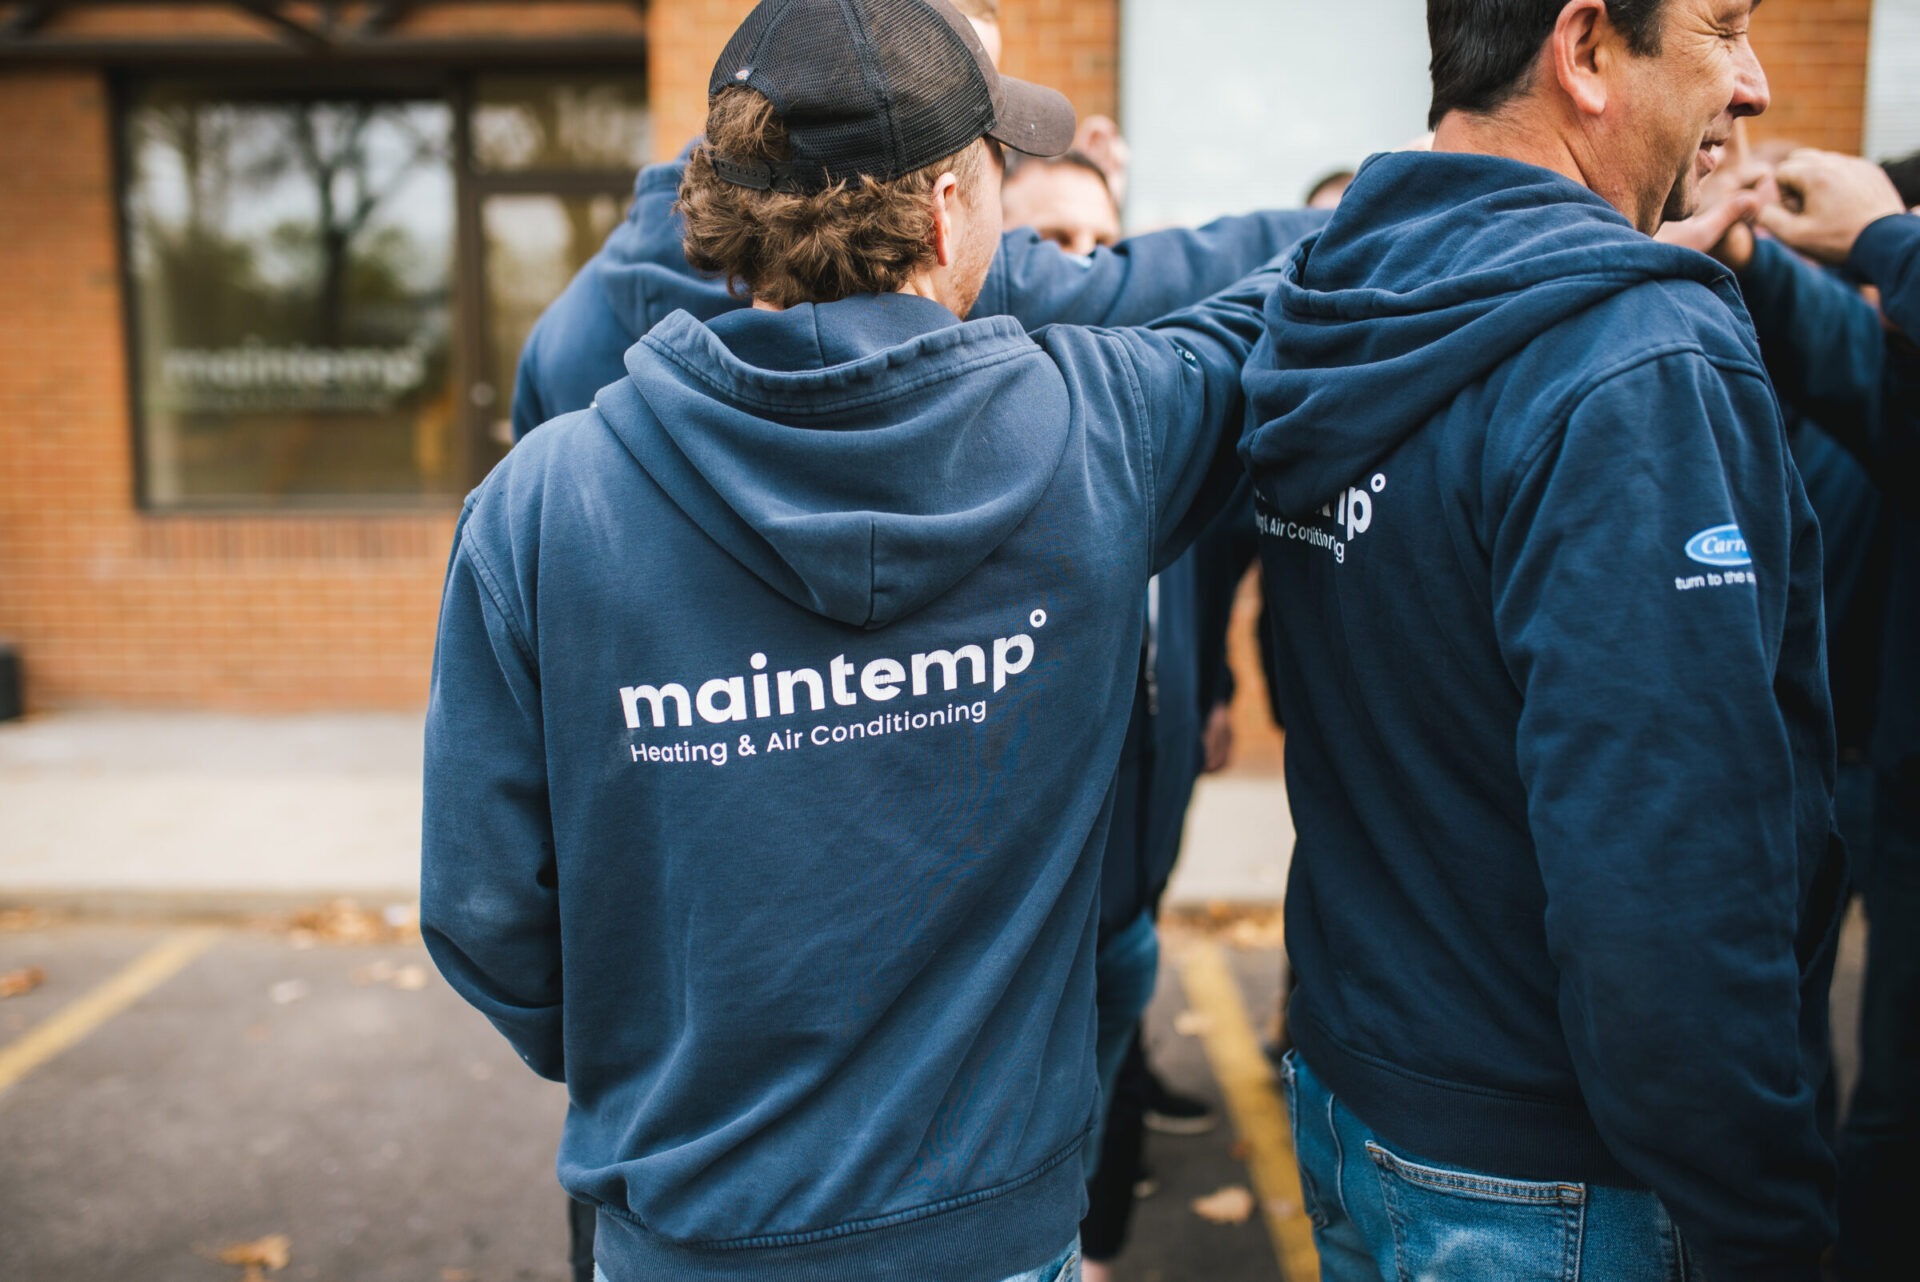 Several people in blue hoodies with "maintemp Heating & Air Conditioning" logos on them are standing together, fostering a sense of teamwork.